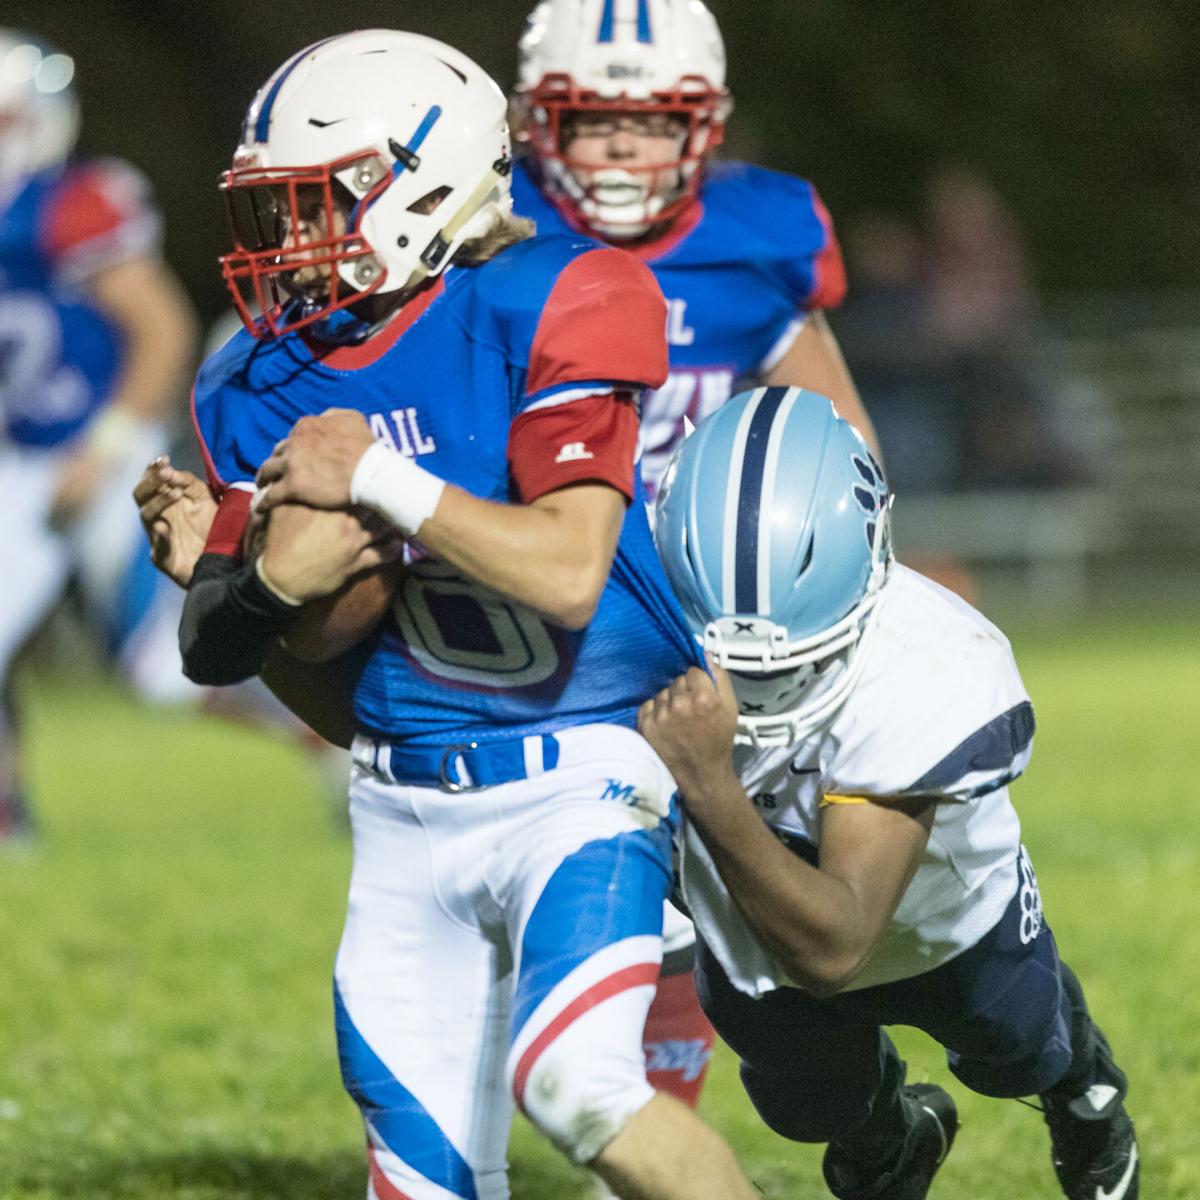 More precise Patriots race to 33-0 shutout of Wildcats